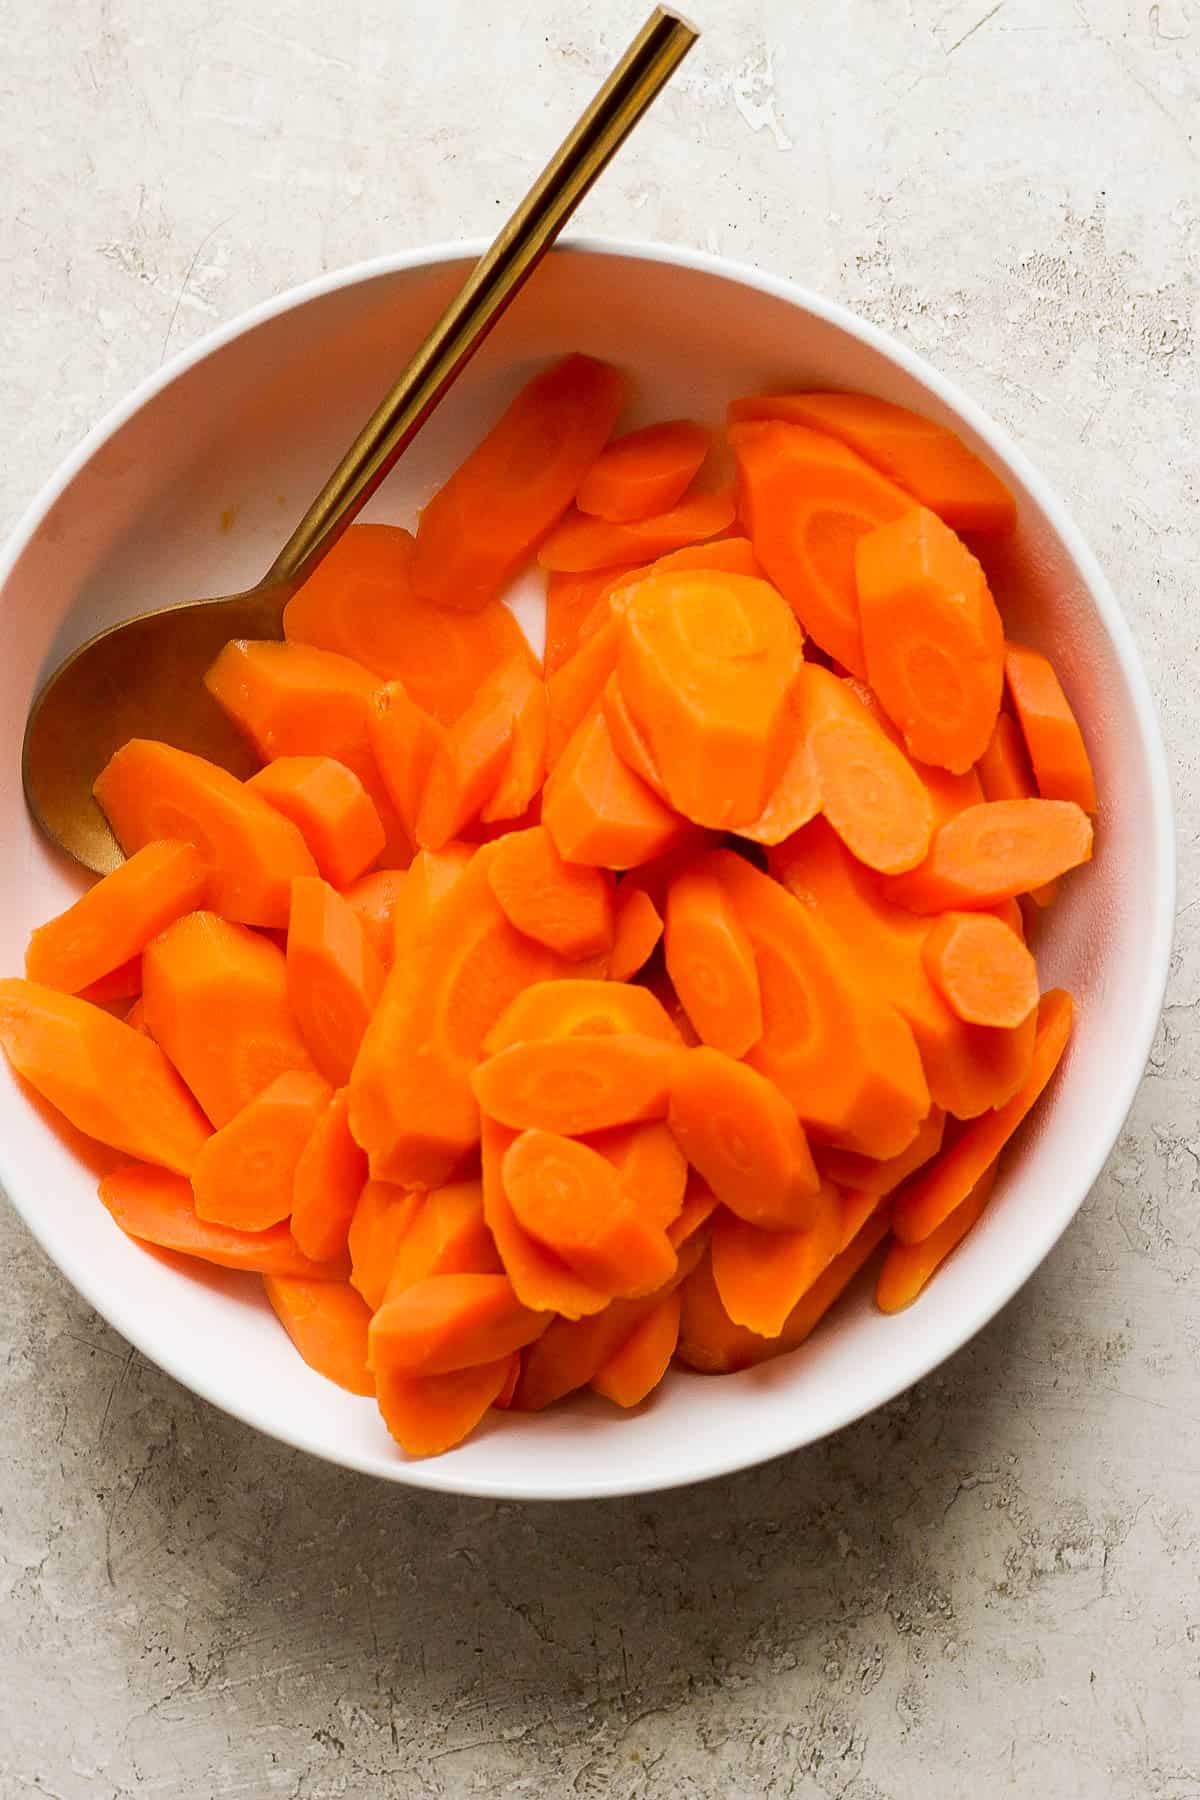 Step-by-step guide on how to long to boil carrots.